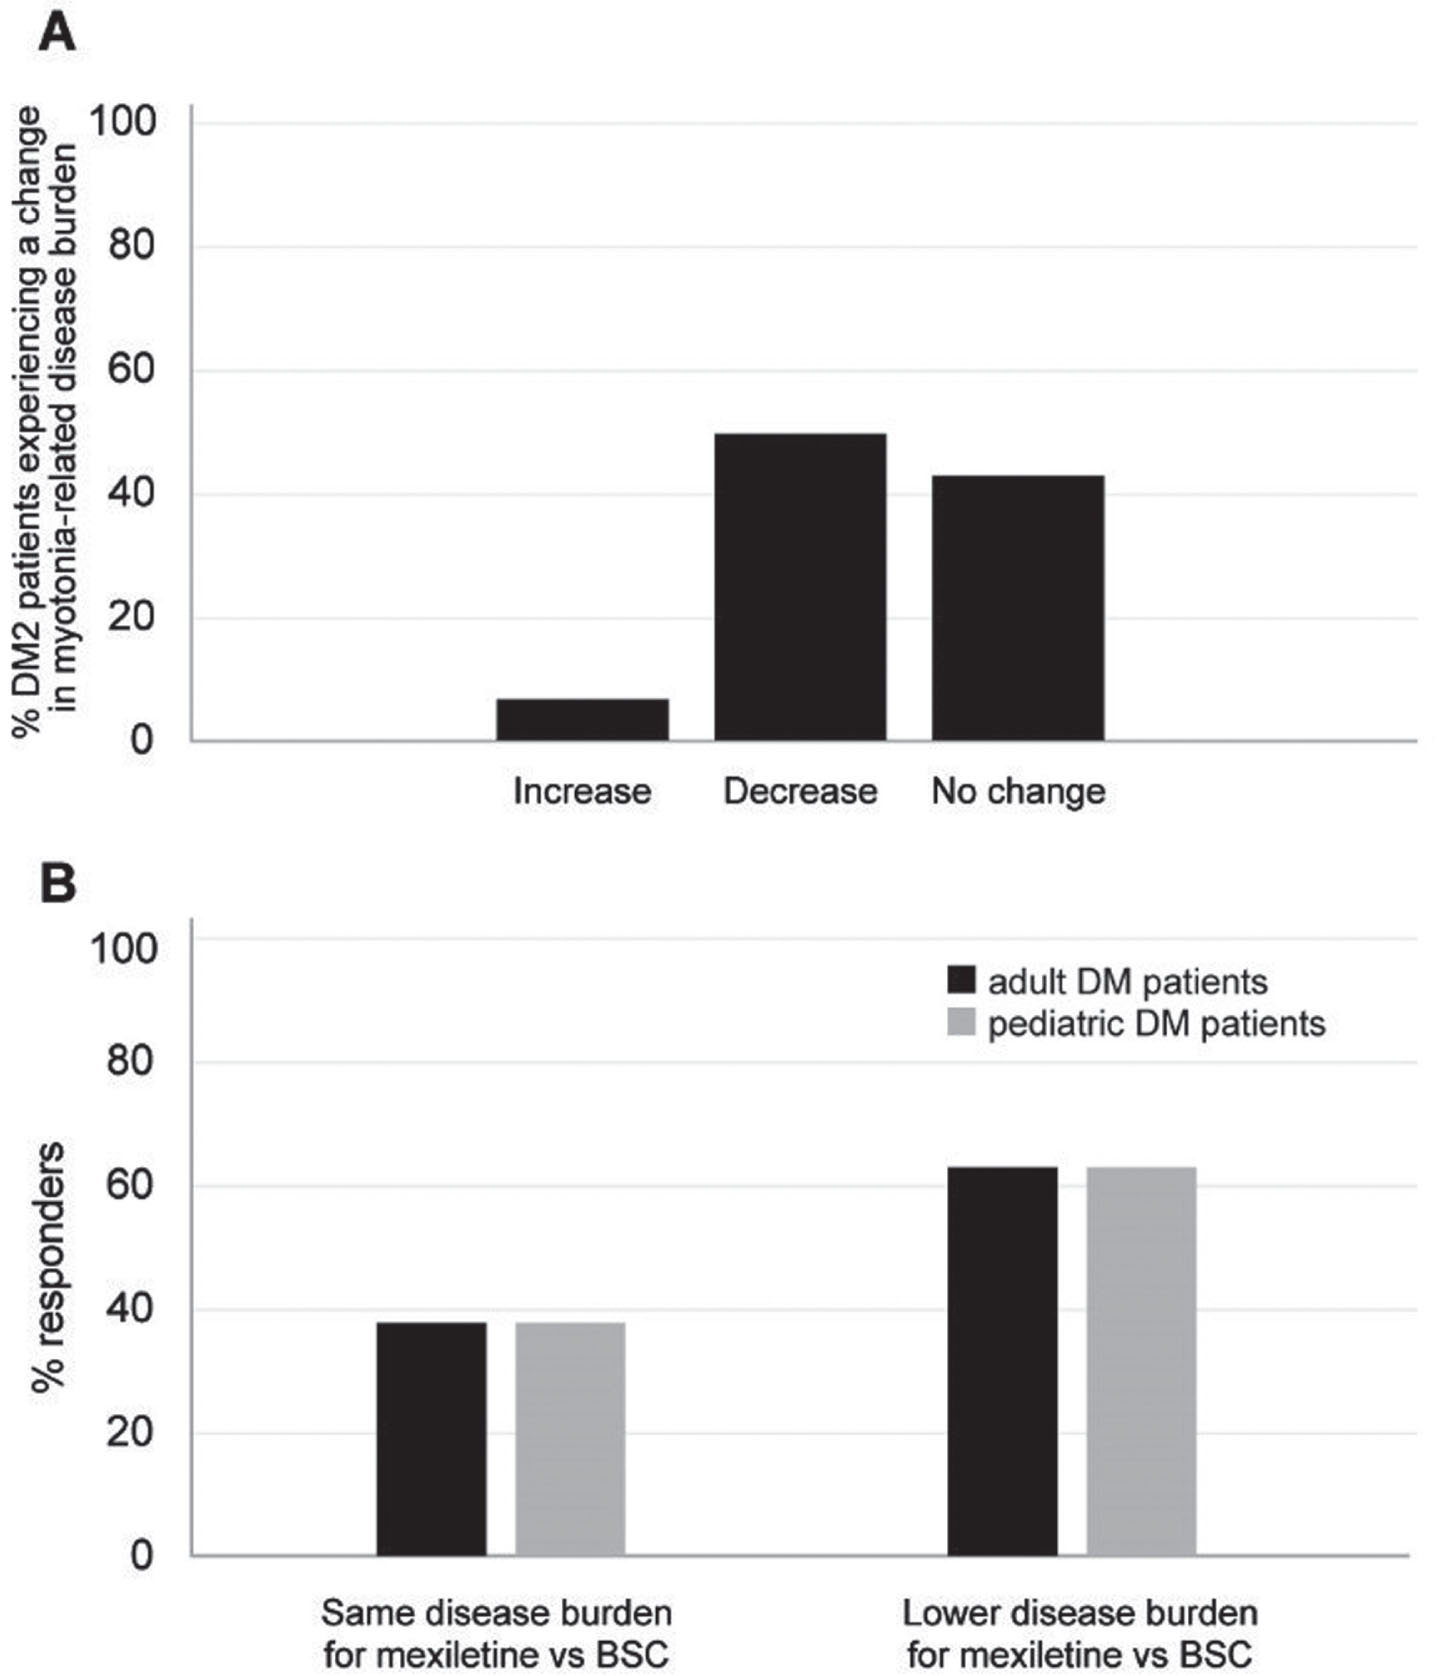 (A) Percentage of DM2 patients expected to experience a change in myotonia-related disease burden upon use of mexiletine vs BSC in the opinion of the expert panelists. (B) Percentage of panelists foreseeing a change in the disease burden for DM adult (black bar) and pediatric (gray bar) patients upon use of mexiletine vs BSC. BSC: best supportive care.